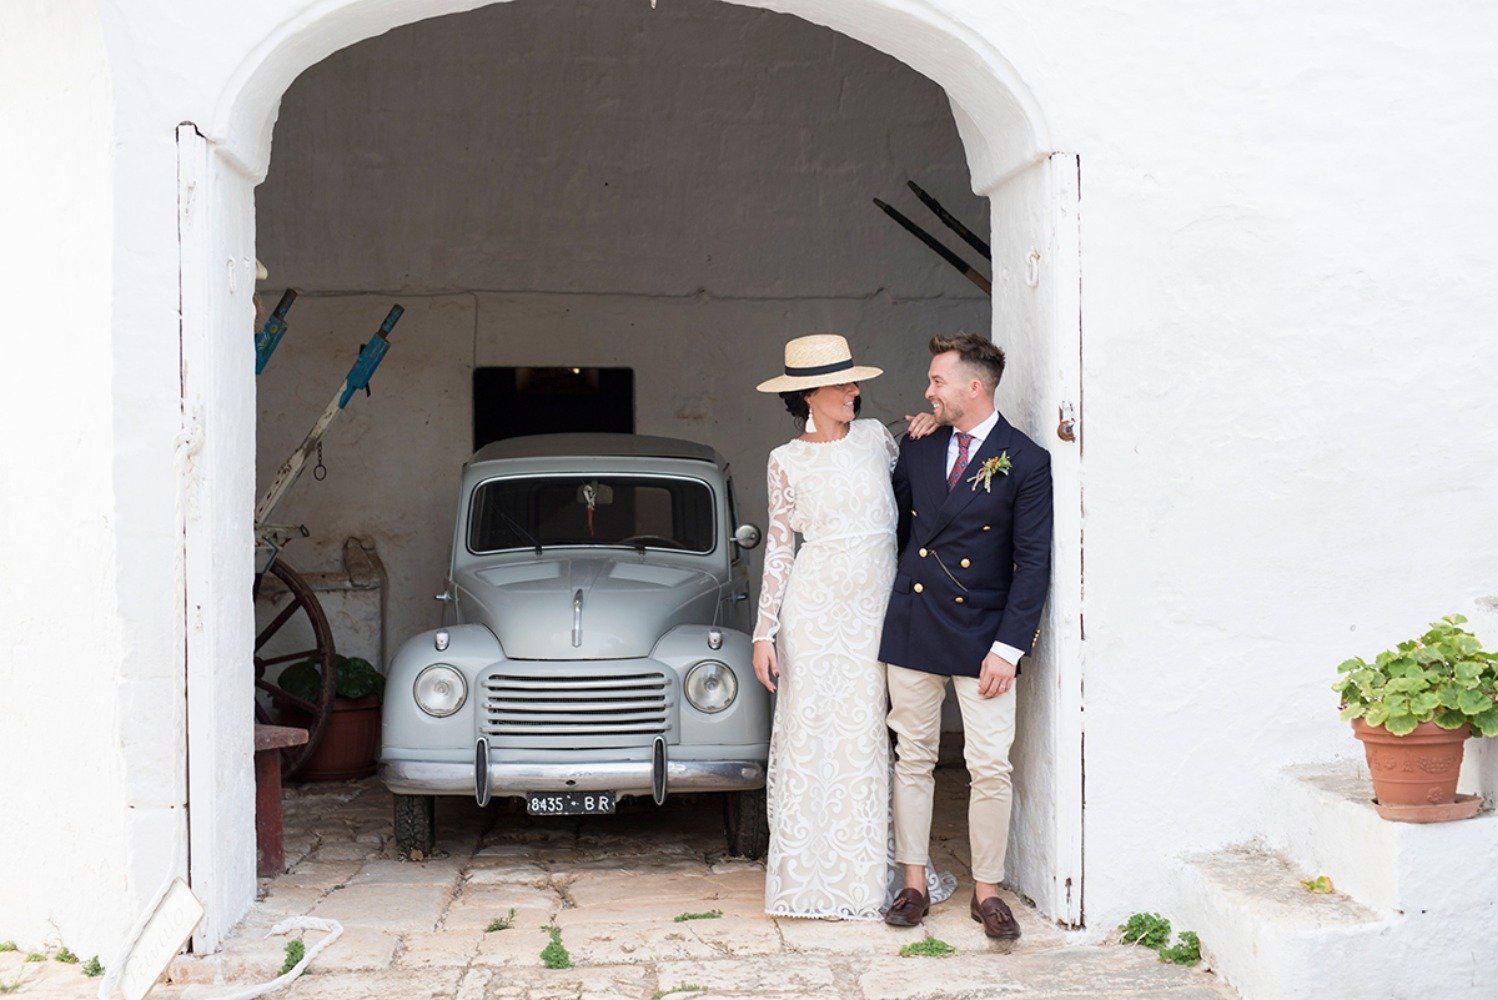 sweet wedding couple with vintage car